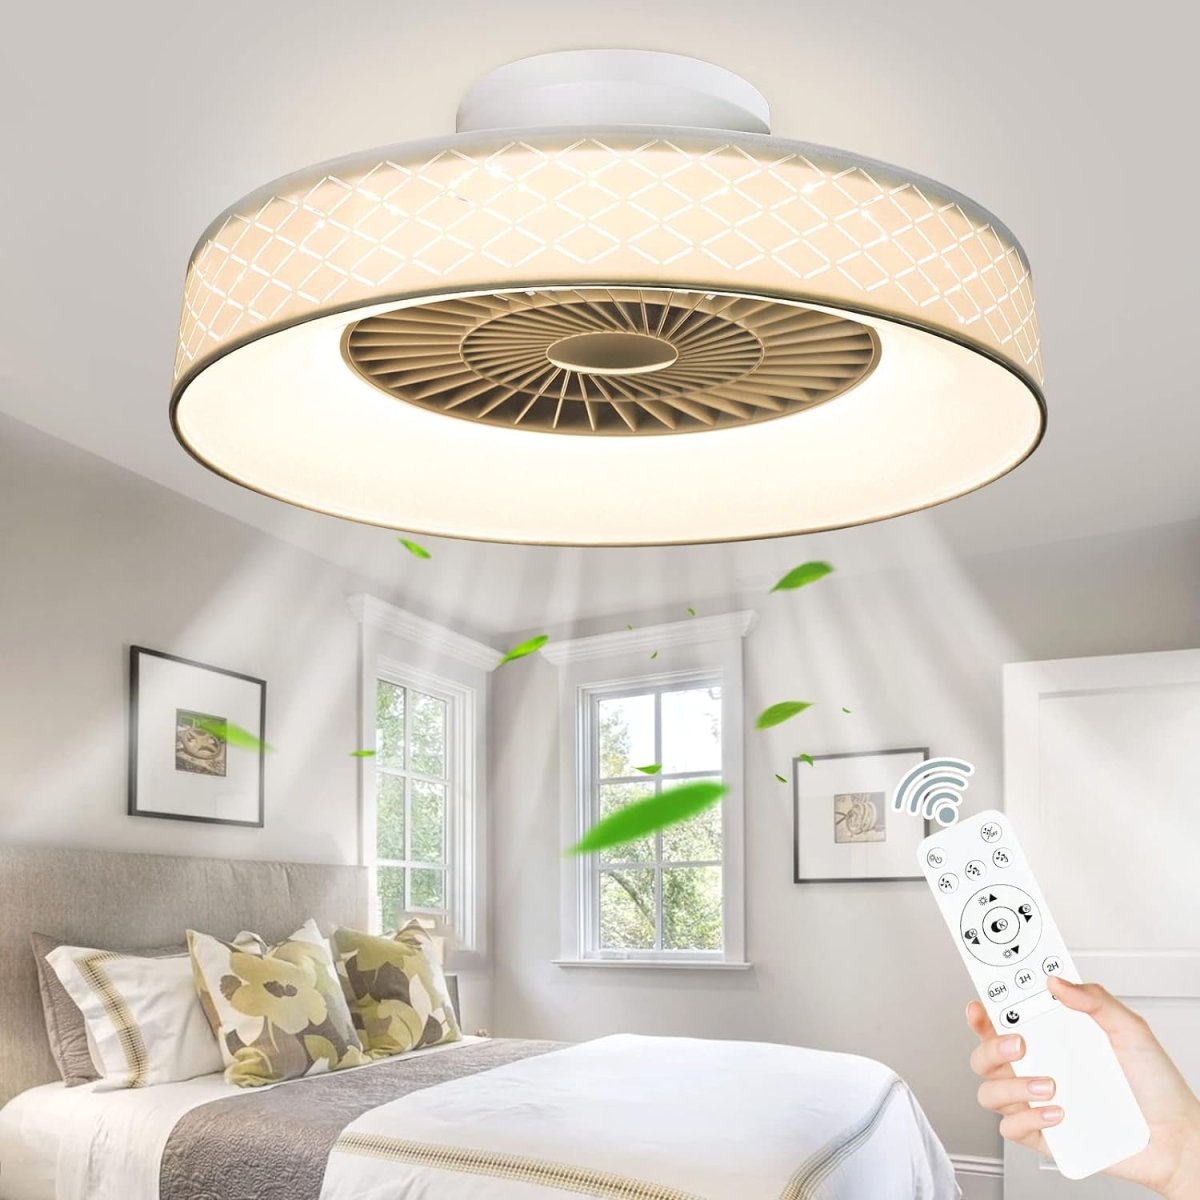 DLLT Low Profile Ceiling Fan with Light, 22.5'' LED Dimmable Ceiling Fans with Lights and Remote, Modern Bladeless Enclosed Ceiling Fan Flush Mount with Reverse Motor for Bedroom Living Room, White Argyle - WS-FPZ47-40C-WS 2 | DEPULEY